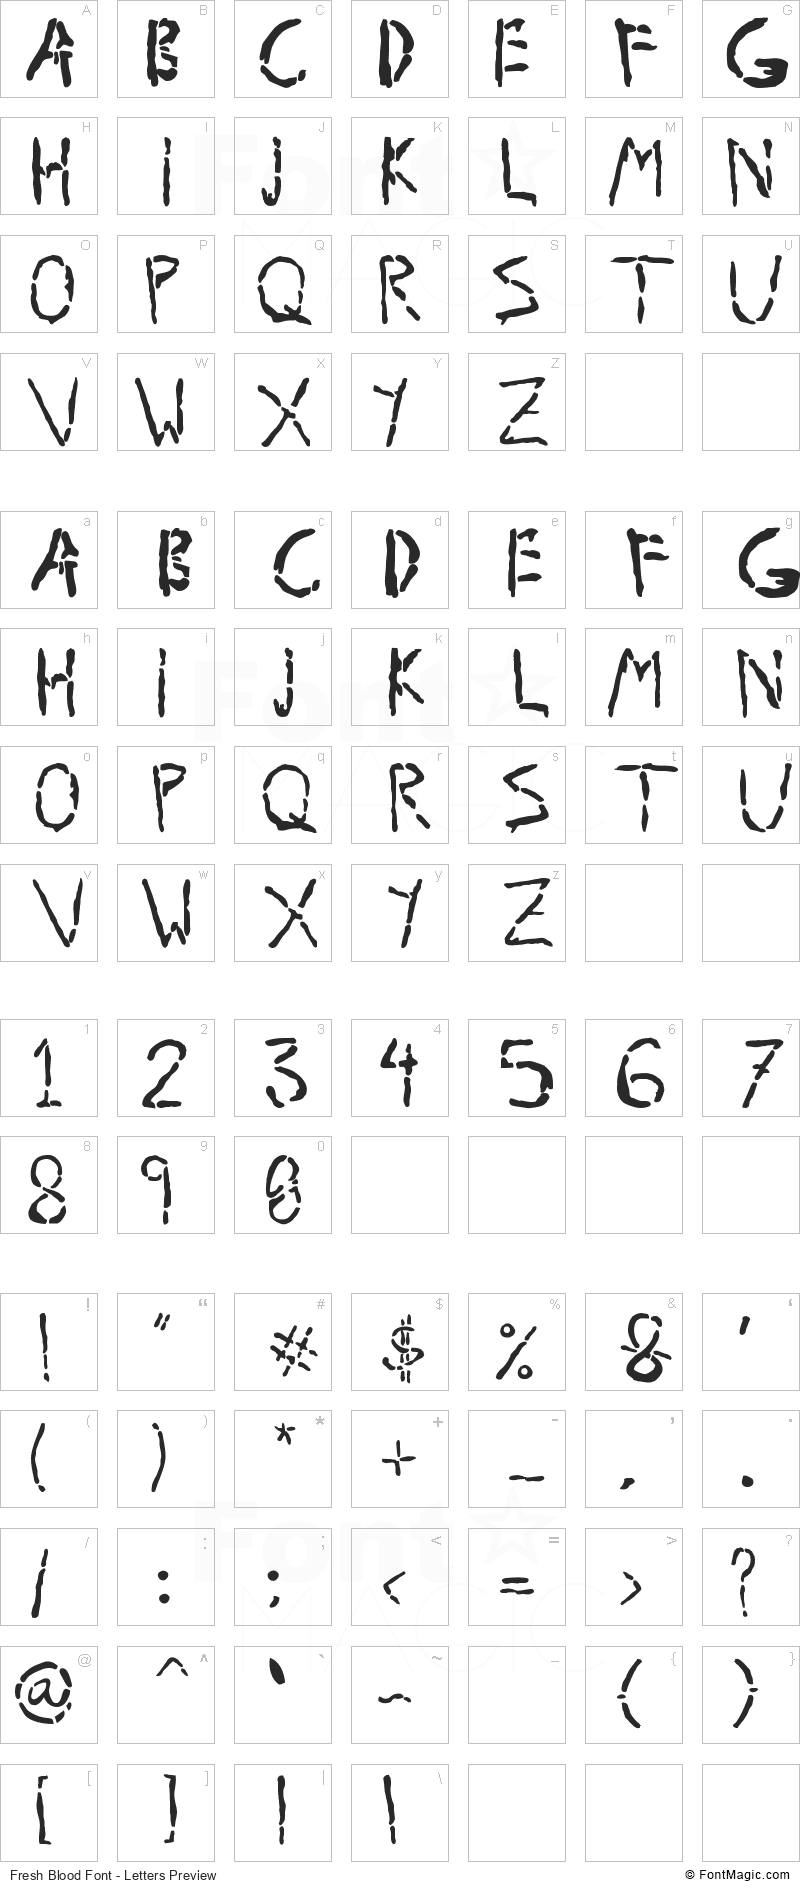 Fresh Blood Font - All Latters Preview Chart